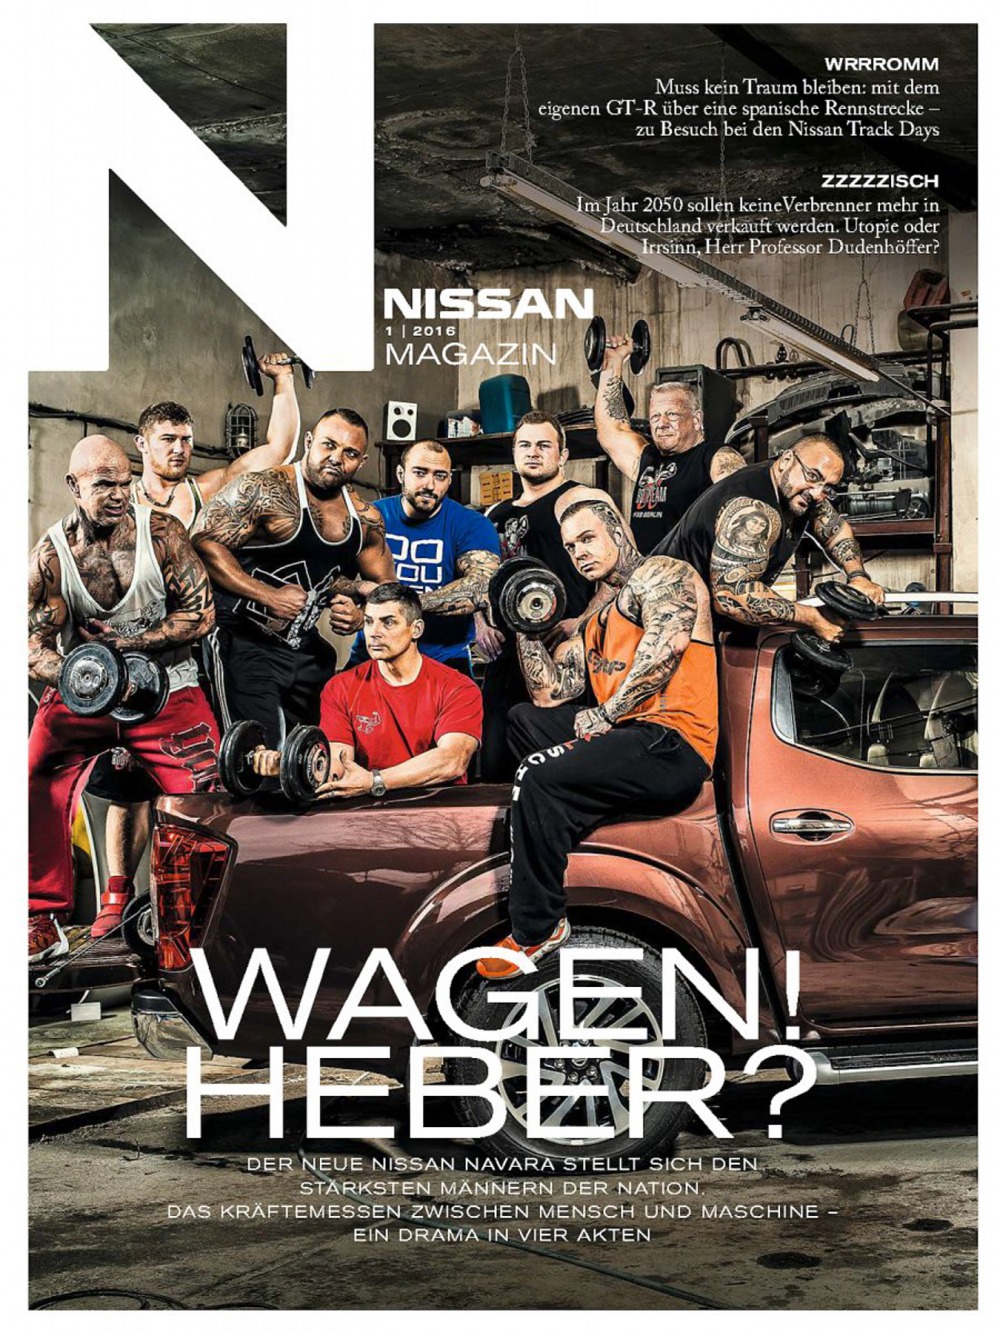 nissan magazin wagenheber coverstory (7 images)